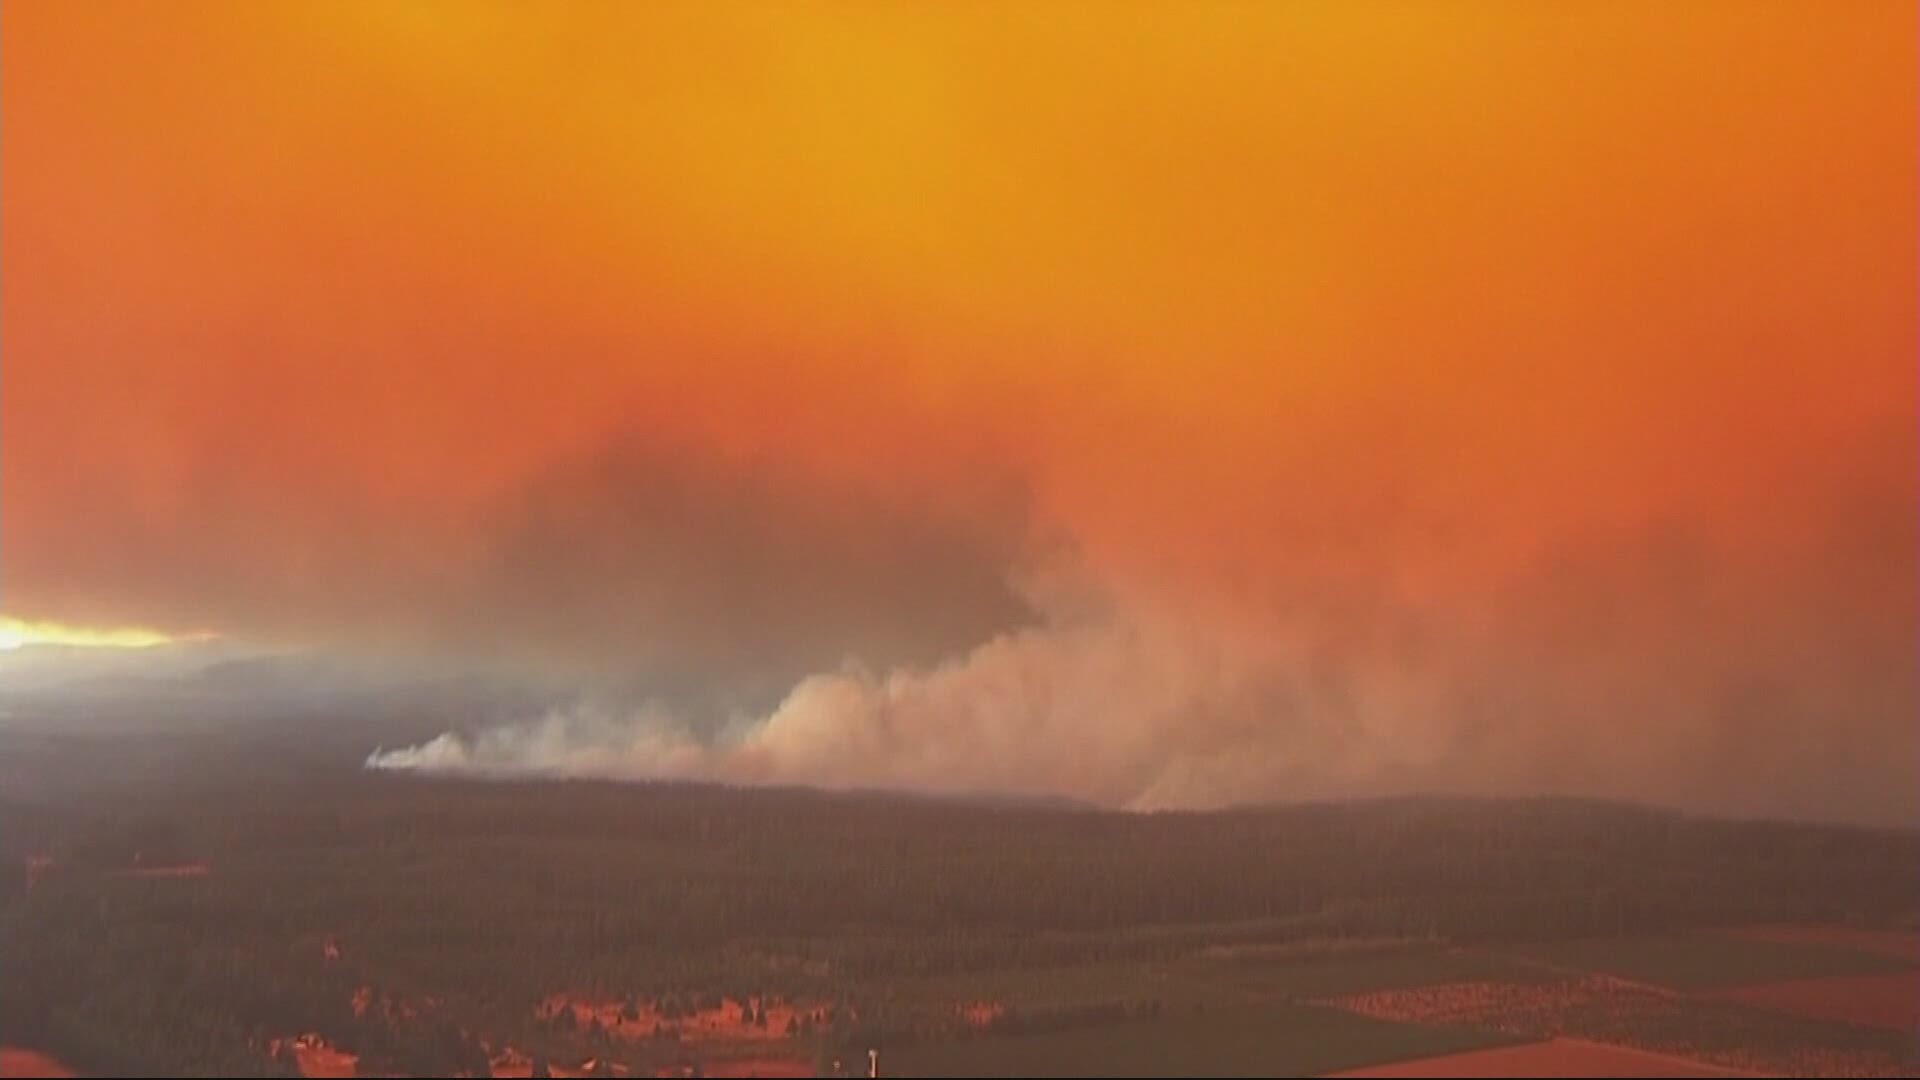 Predictions call for this year's fire season to be worse than last year. Keely Chalmers tells us what the experts expect.